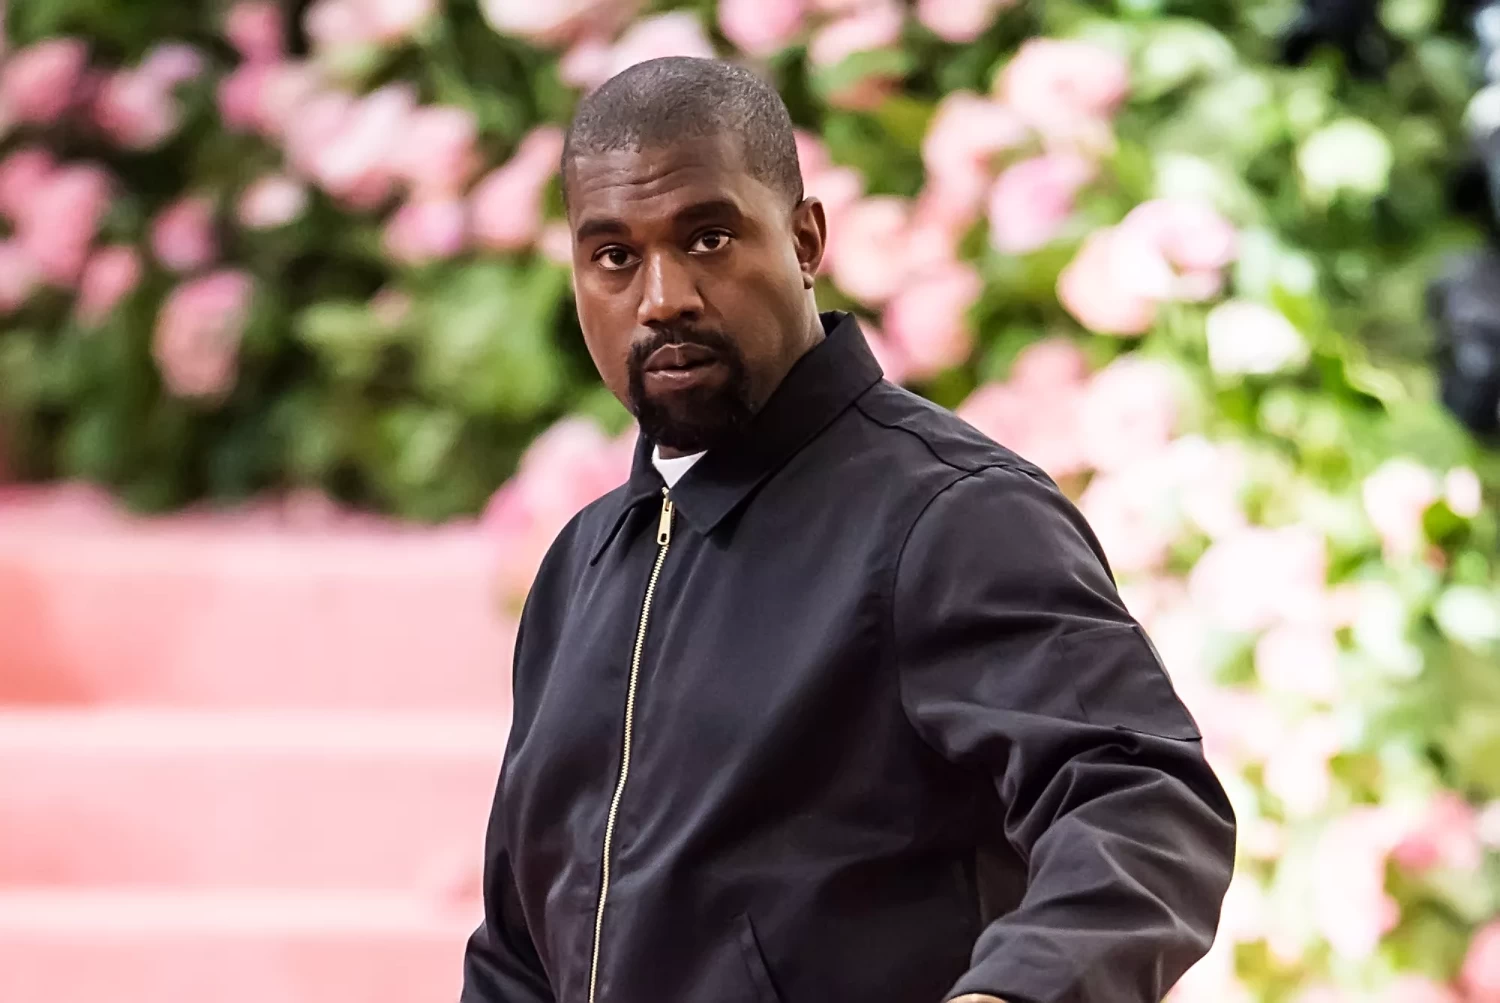 Kanye West is seen arriving at the 2019 Met Gala at The Metropolitan Museum of Art on May 6, 2019, in New York City. He has made multiple controversial comments, which some people say should get him canceled. GILBERT CARRASQUILLO/GC IMAGES